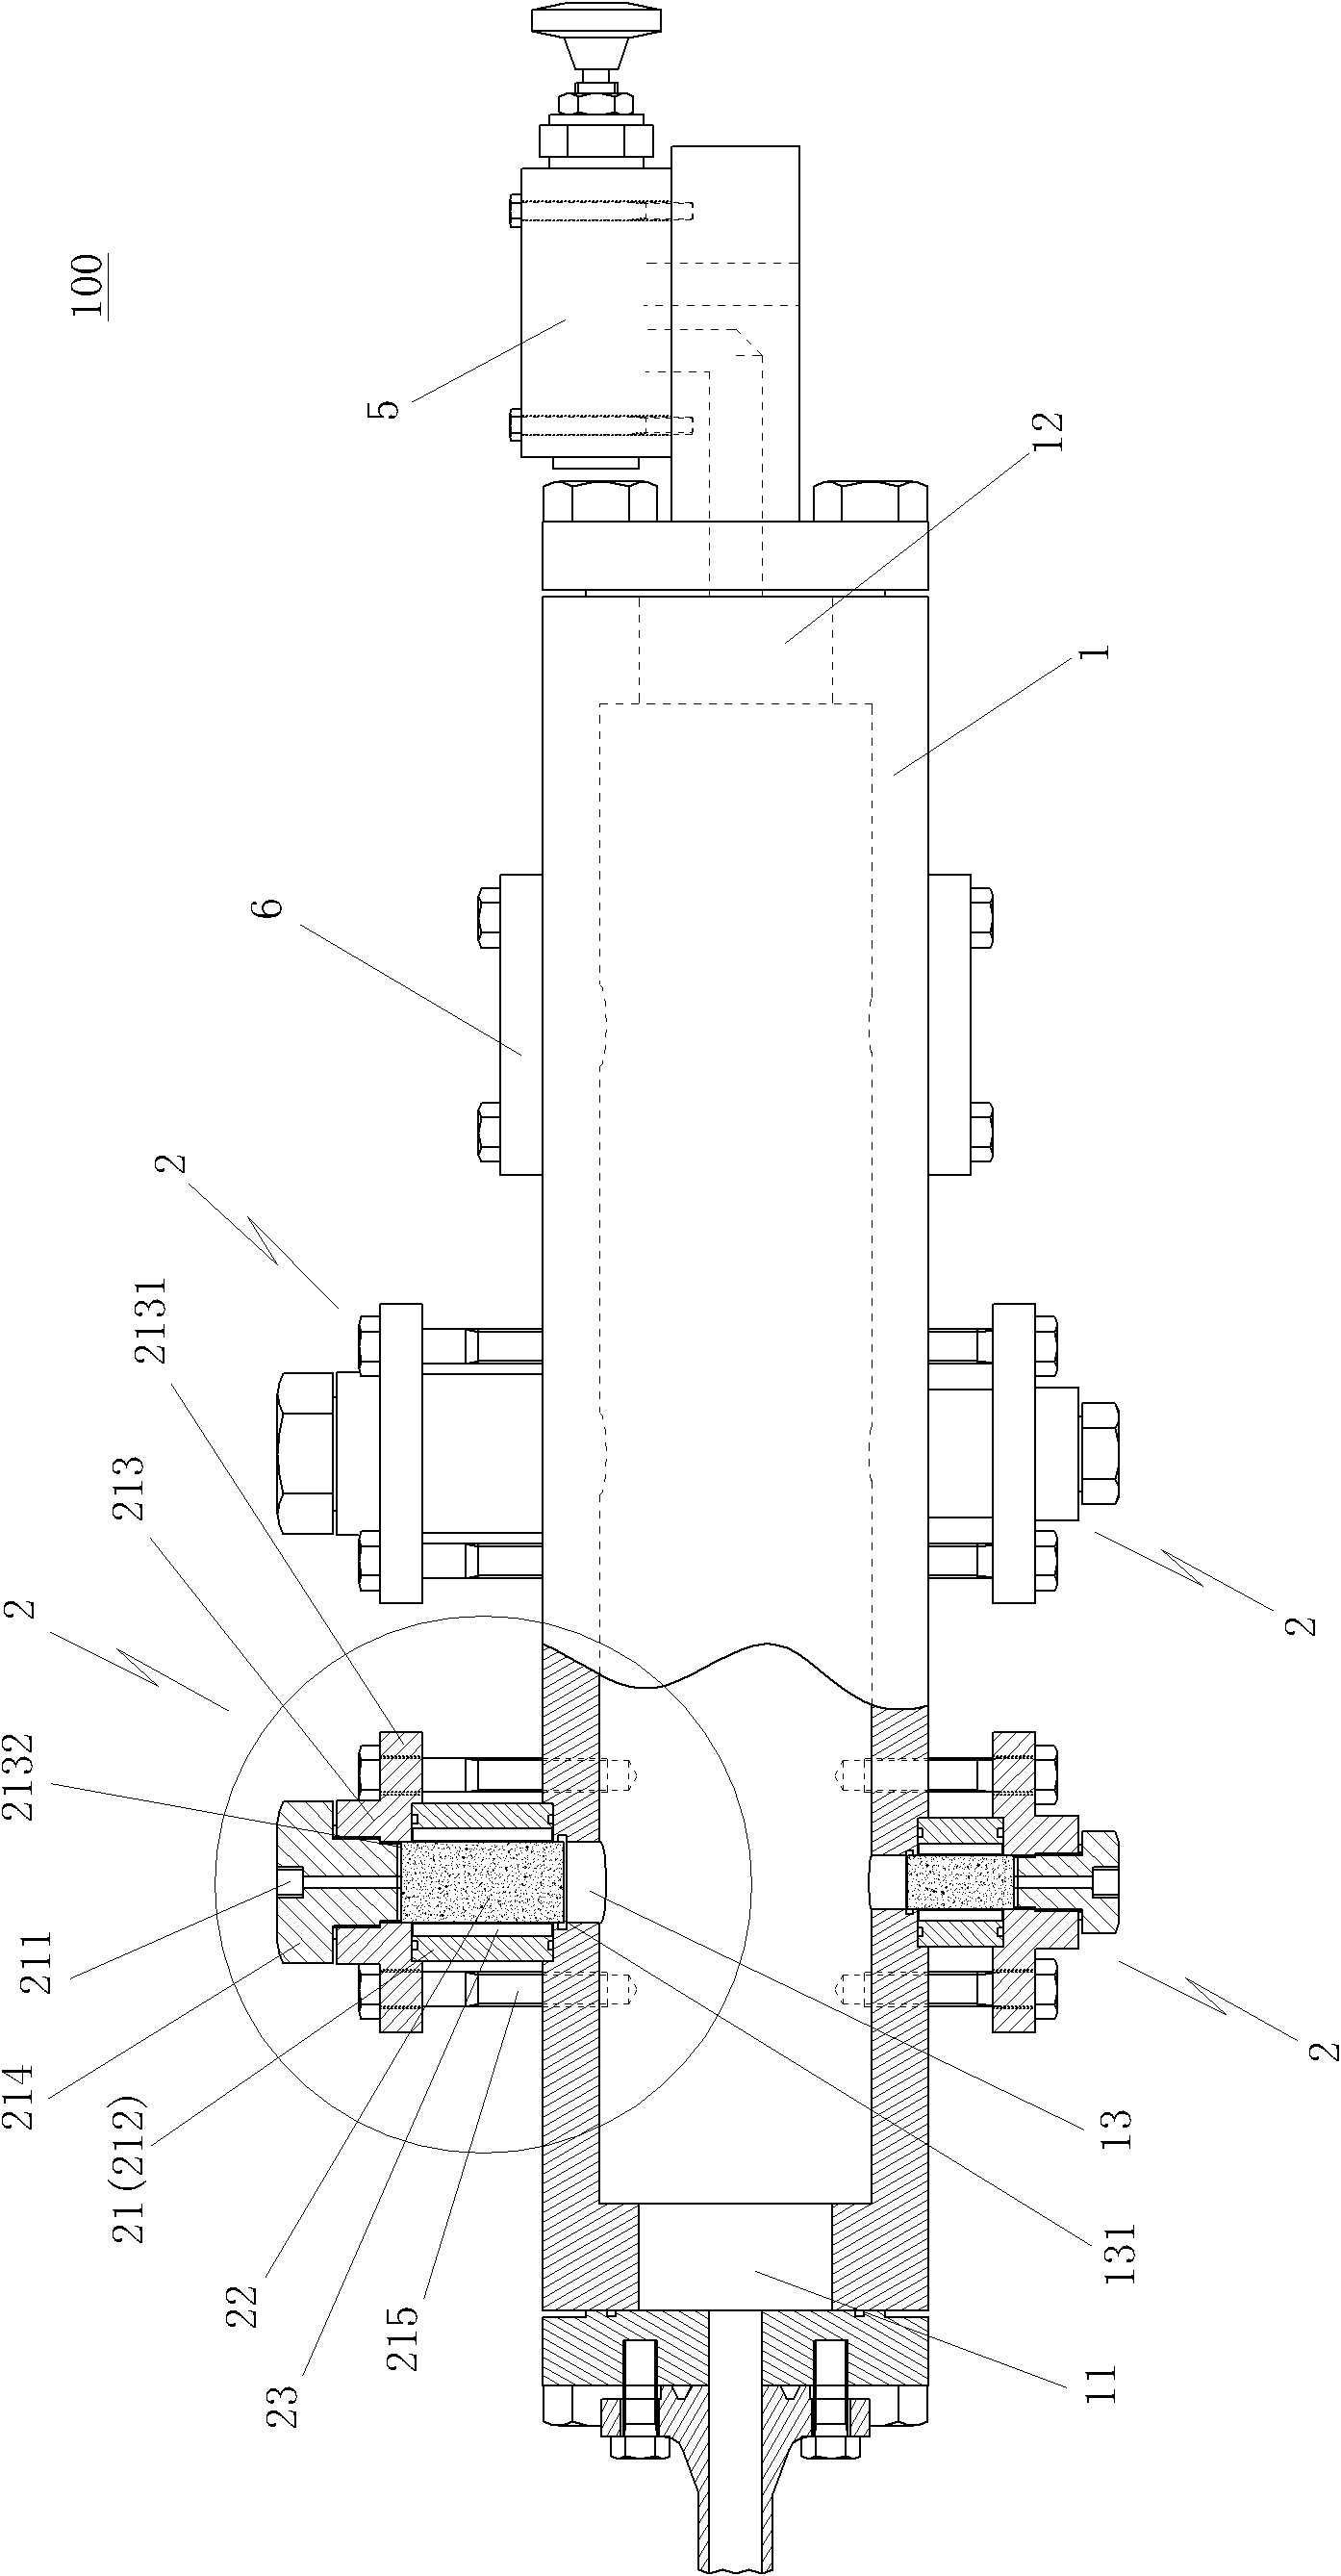 Simulated evaluation device for well-drilling plugging of stress sensitivity stratum